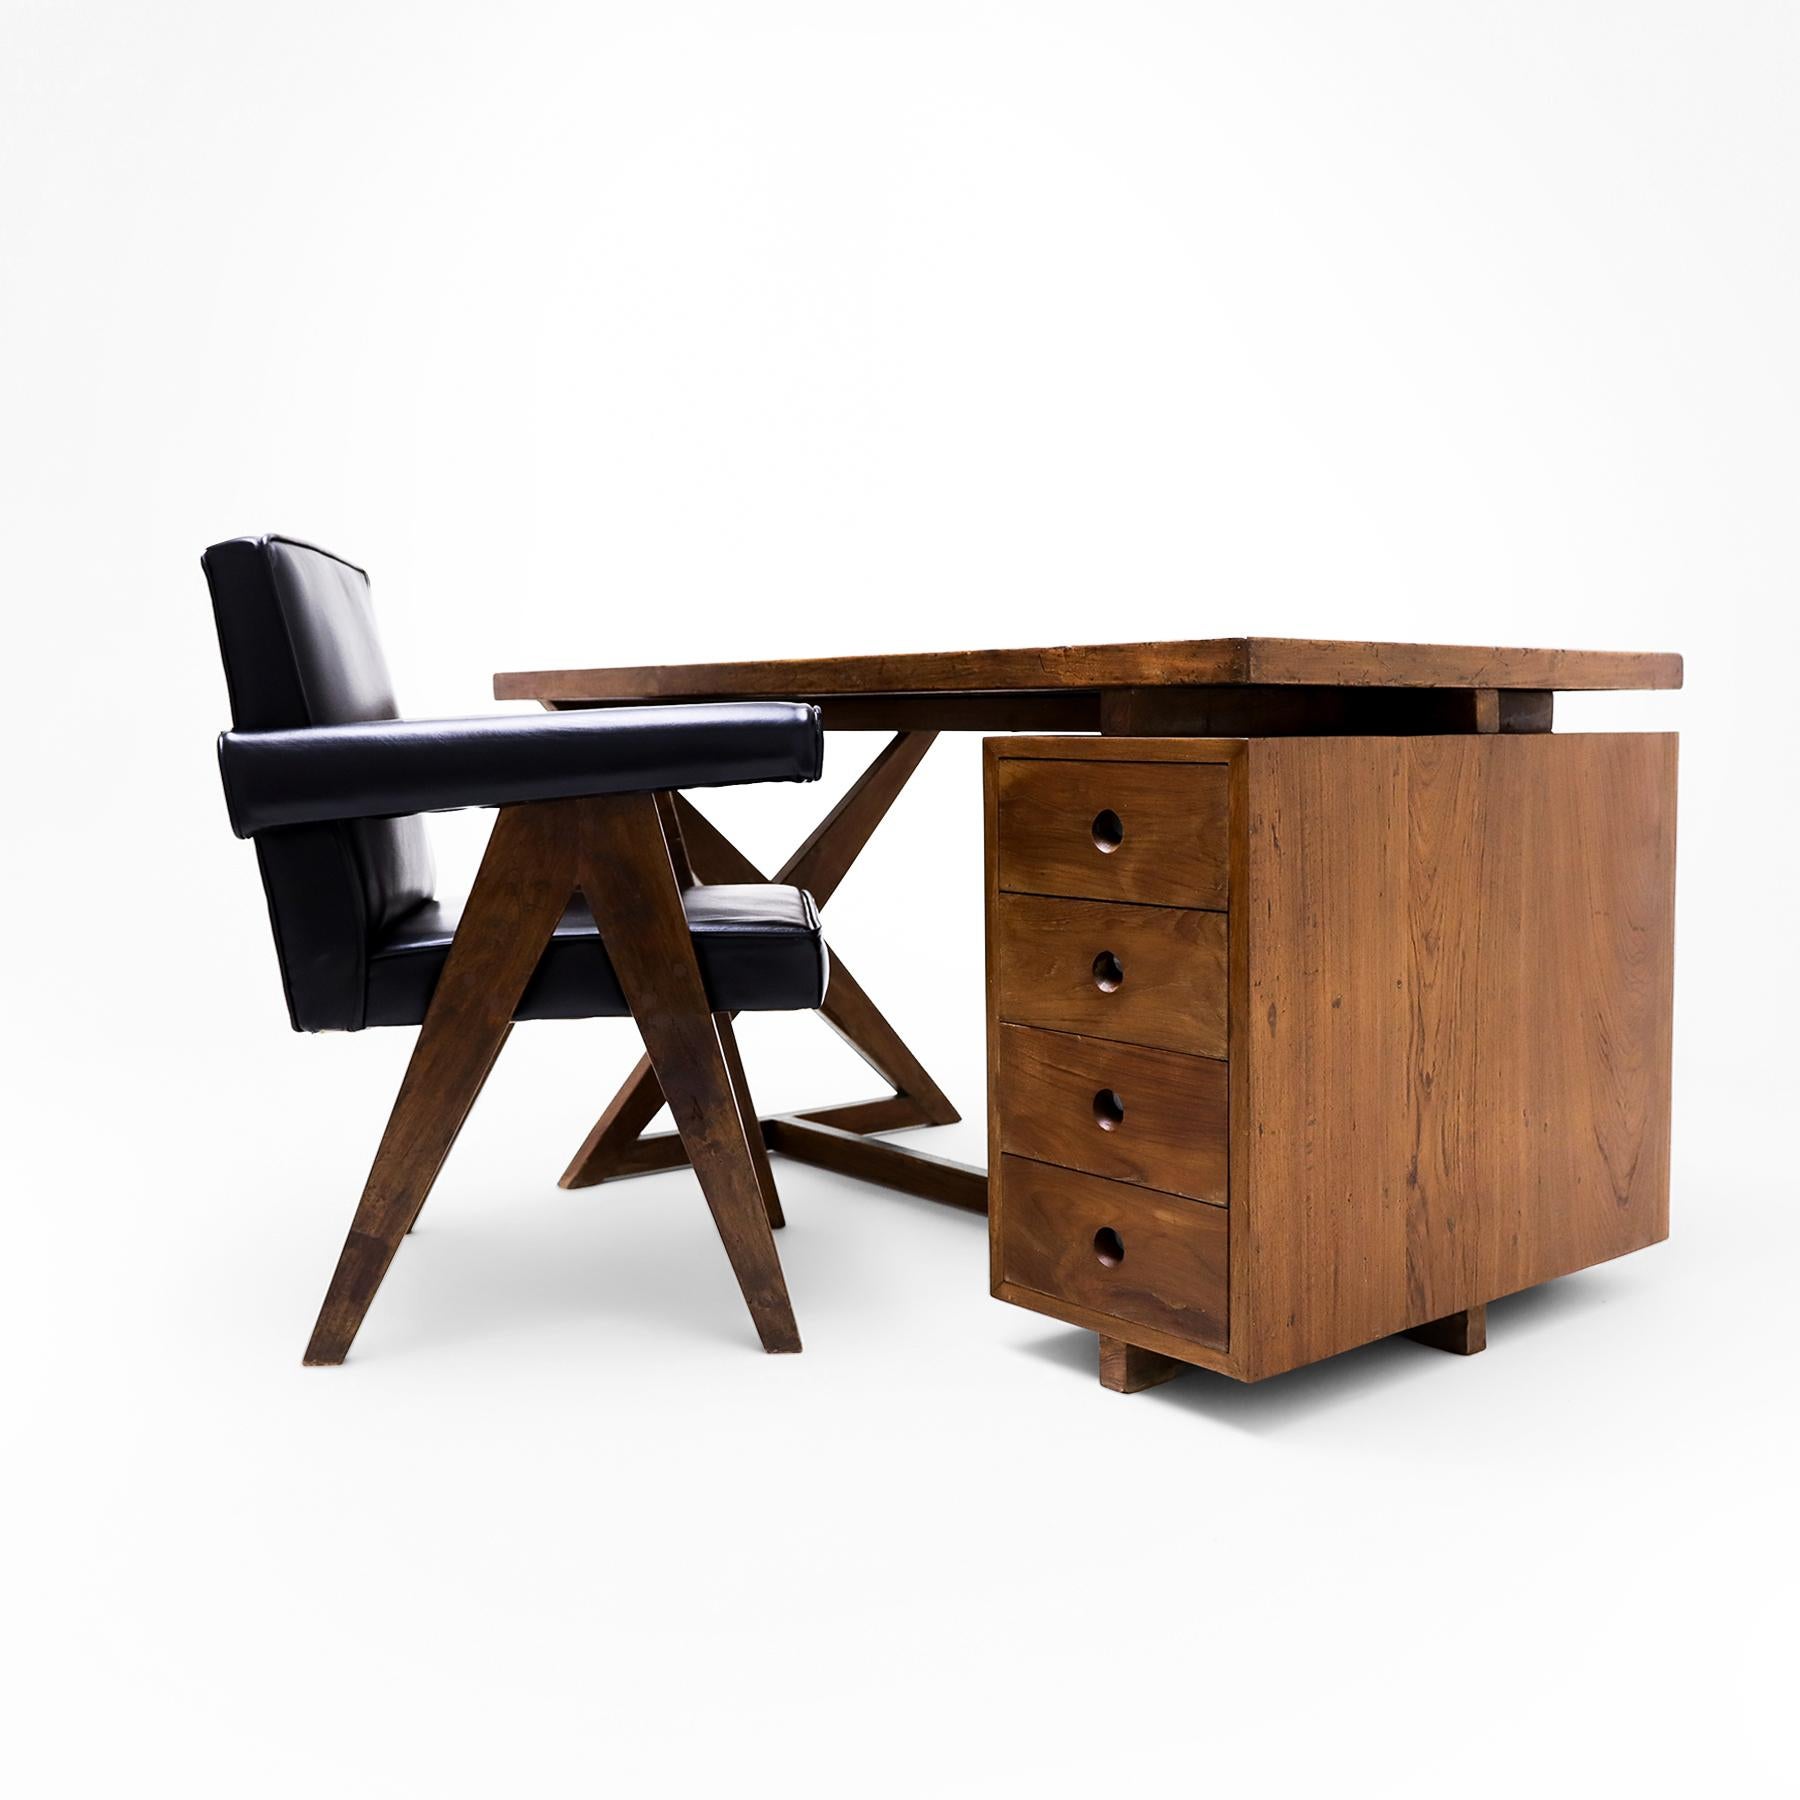 An original Pierre Jeanneret X frame teak and leather Administrative Desk from the Civic buildings of Chandigarh, India, matched to a fully upholstered Model ‘Pj Si 30 A’ Committee Chair.  

Hand-crafted from Burmese teakwood, this vintage Jeanneret